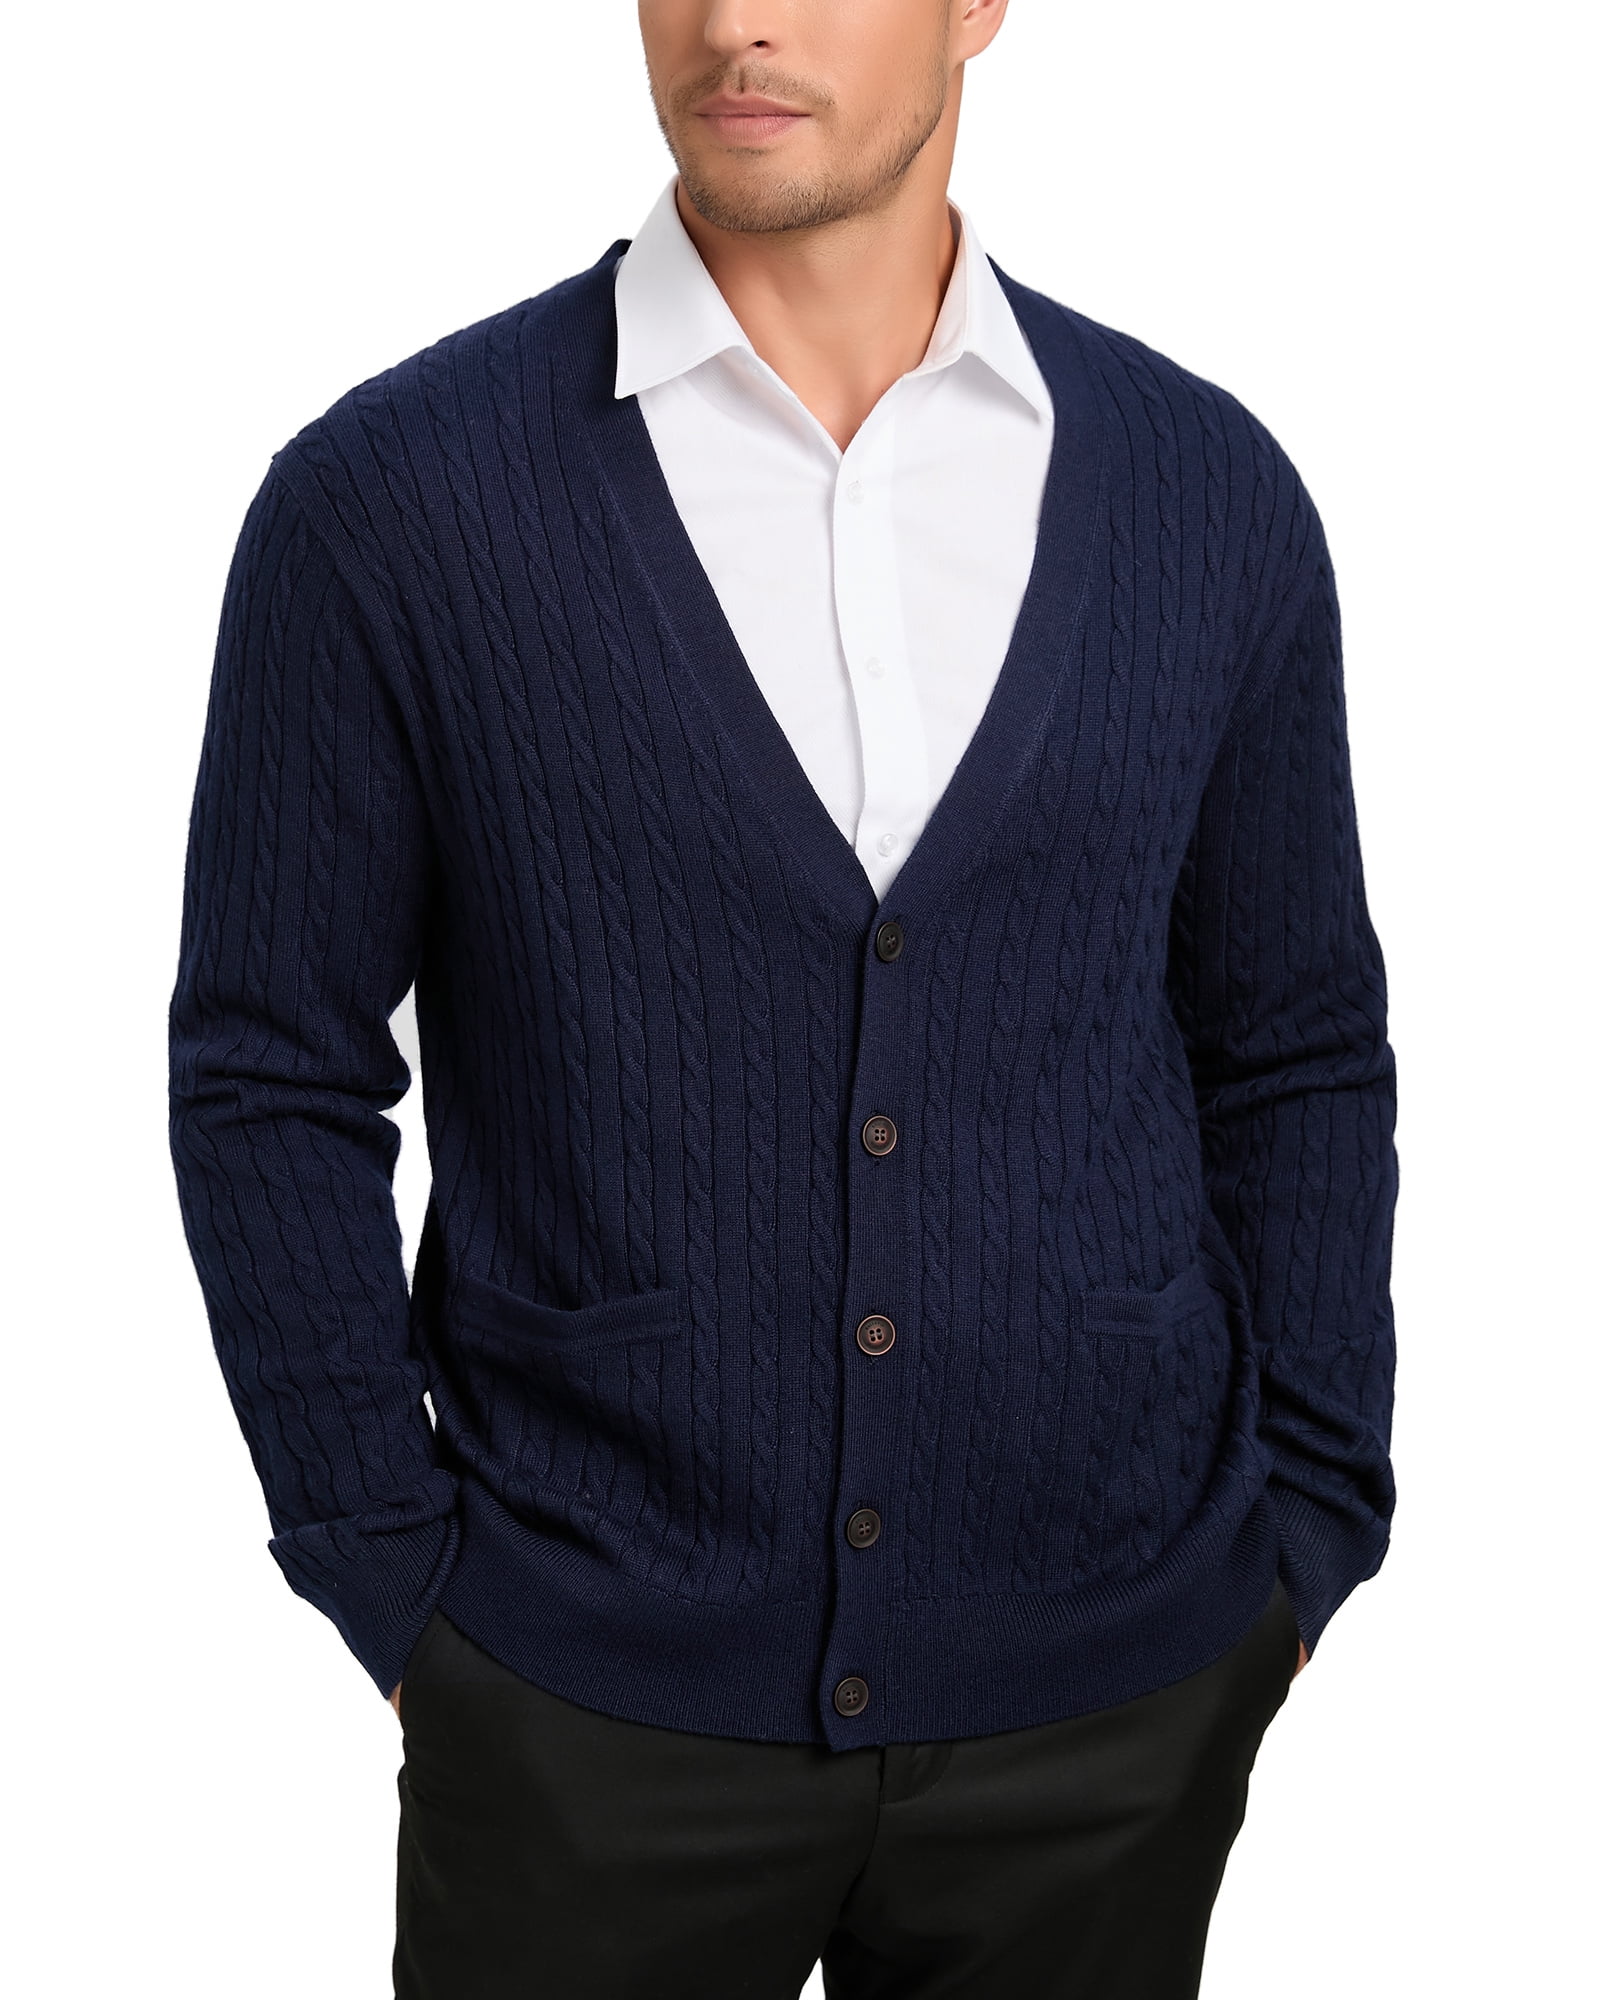 Kallspin Men’s Wool Blend V-Neck Cable-Knit Cardigans Sweaters (Navy ...